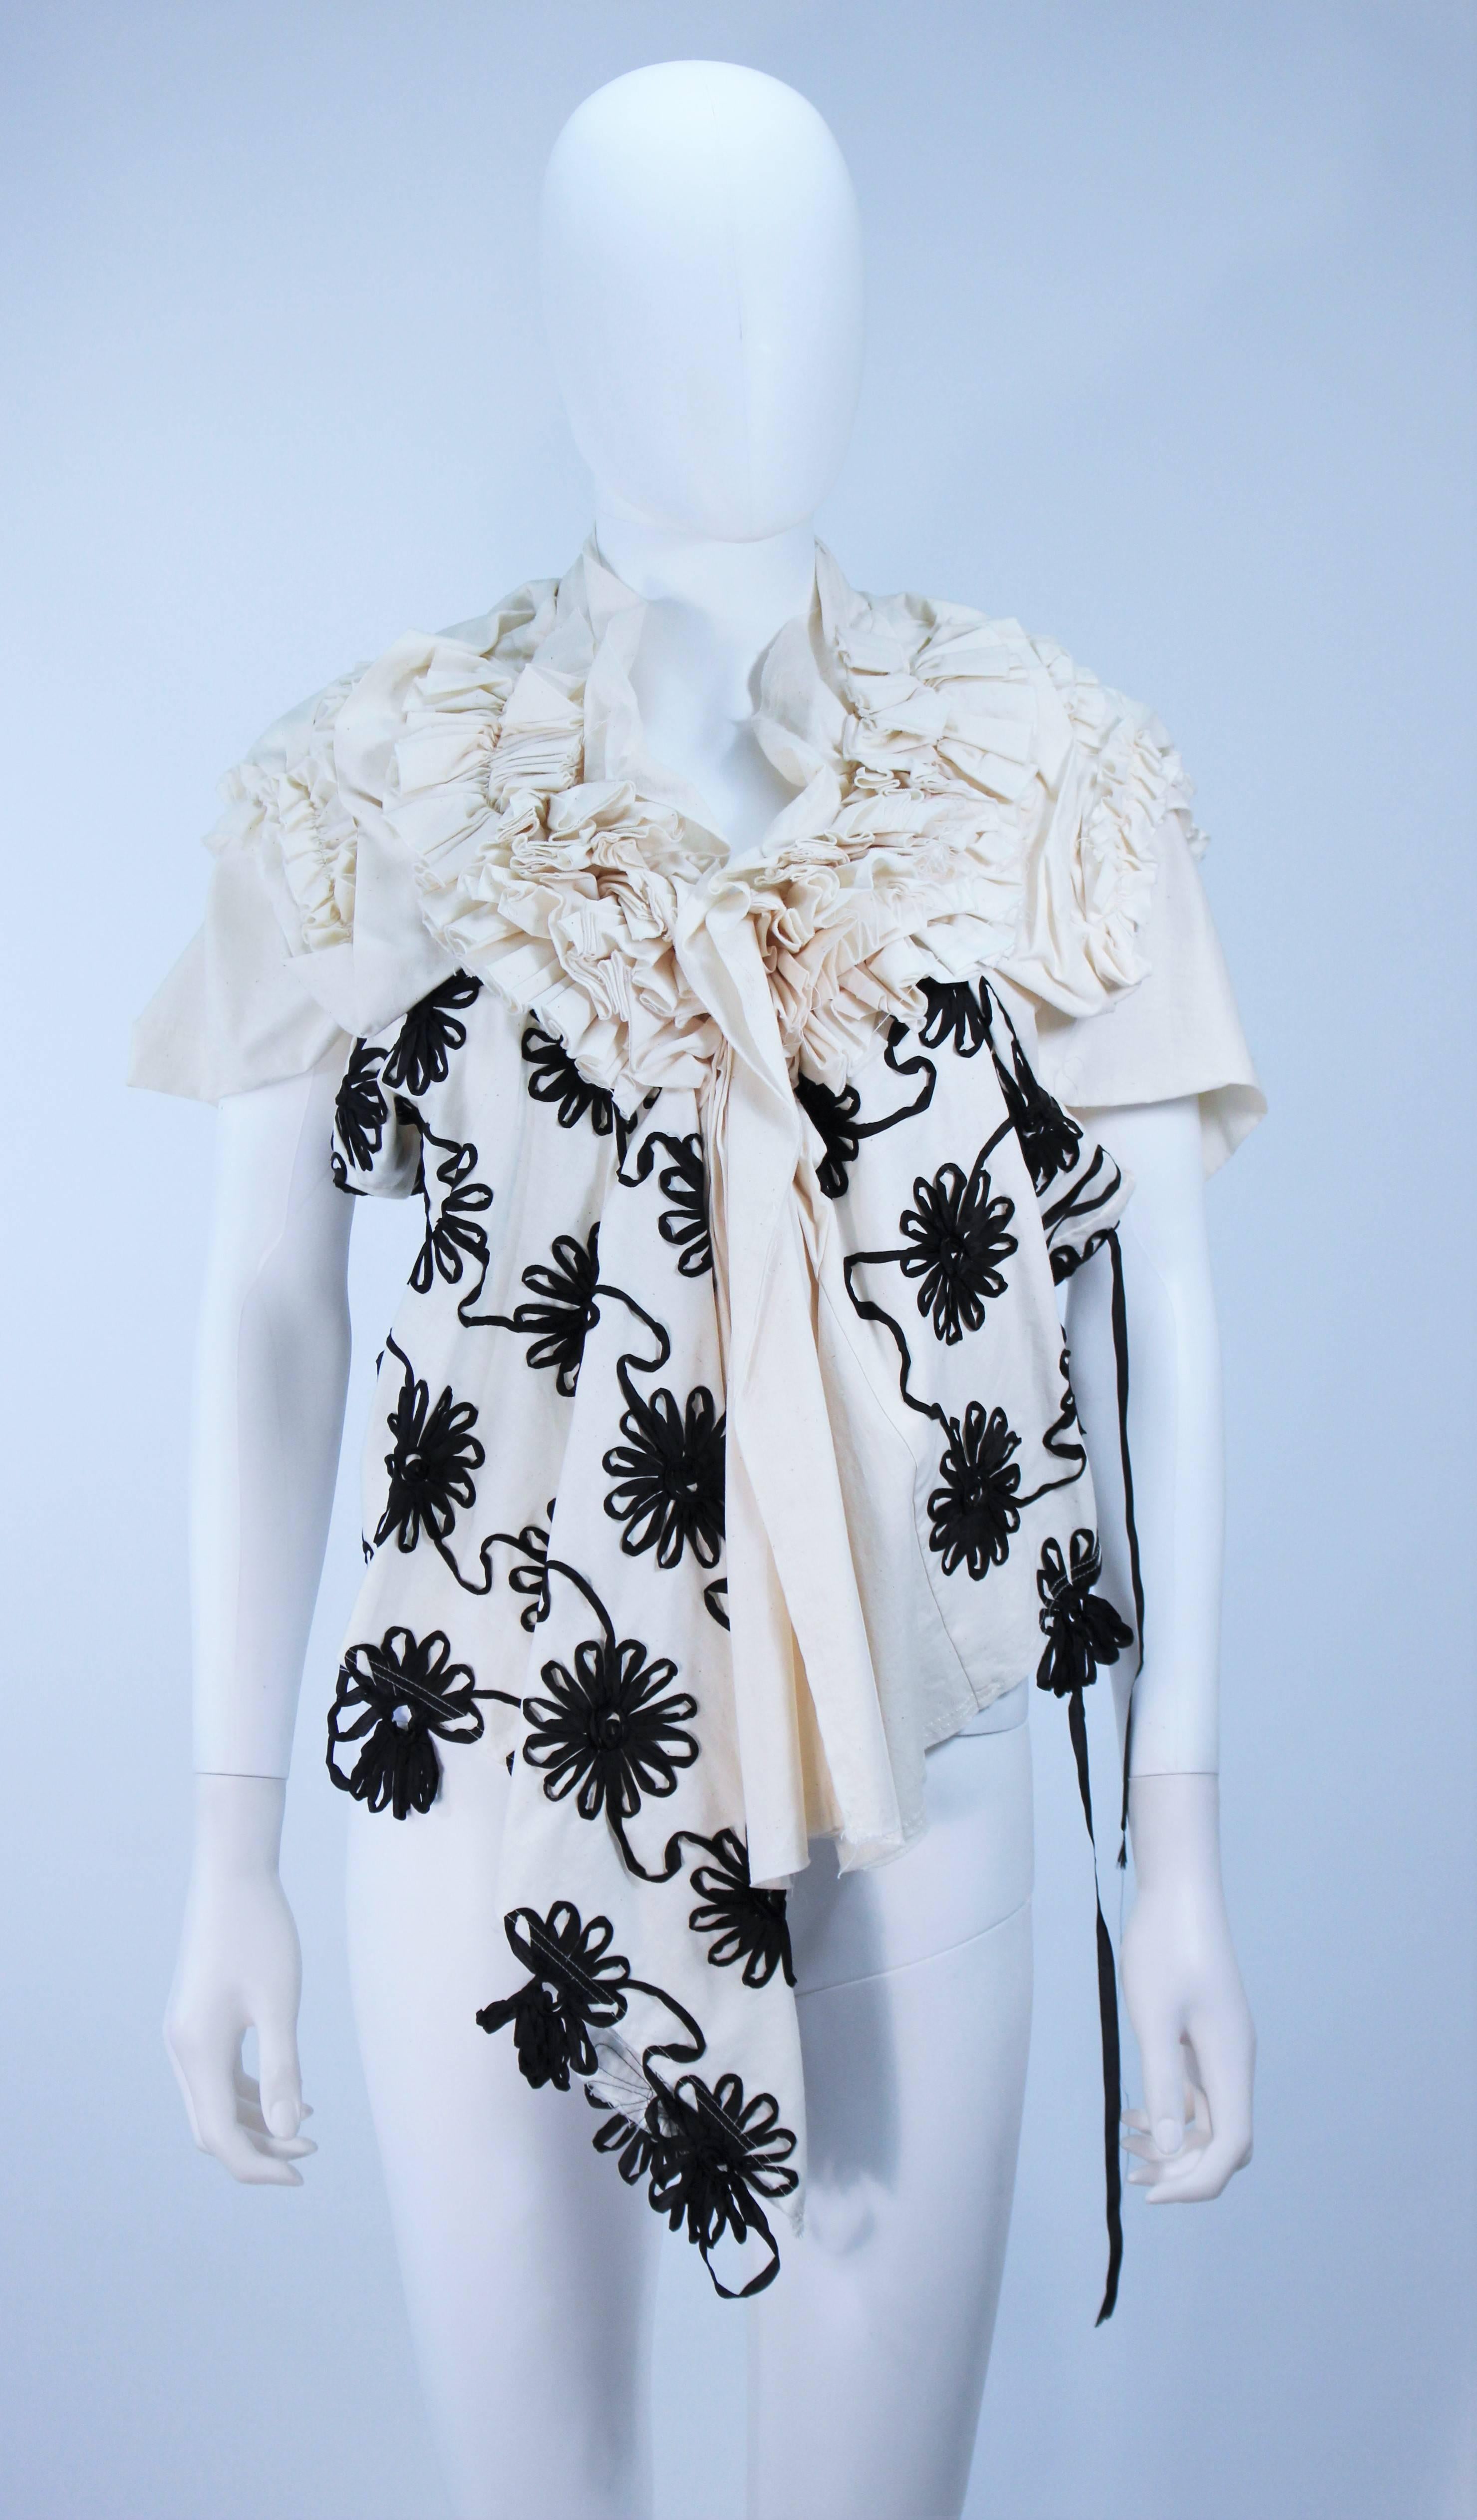  This Comme Des Garcons  top is composed of a natural hue cotton with a floral applique. Features dramatic sleeves with gathers throughout. In like new condition. 

  **Please cross-reference measurements for personal accuracy. 

Measures